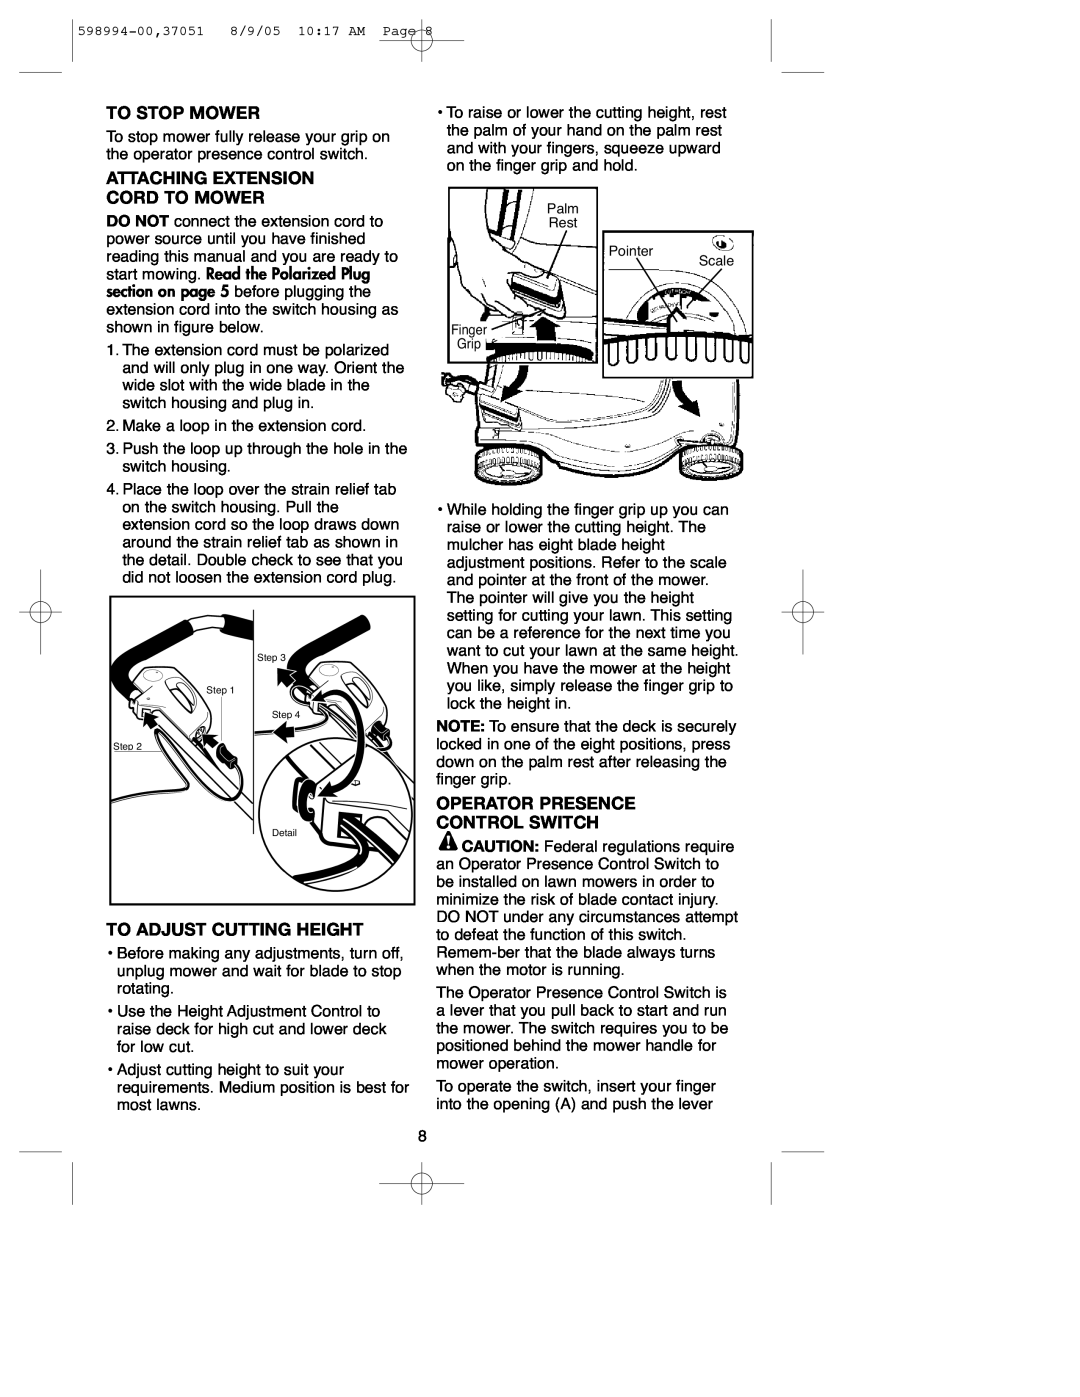 DeWalt 900.37051 instruction manual To Stop Mower, Attaching Extension Cord To Mower, To Adjust Cutting Height 